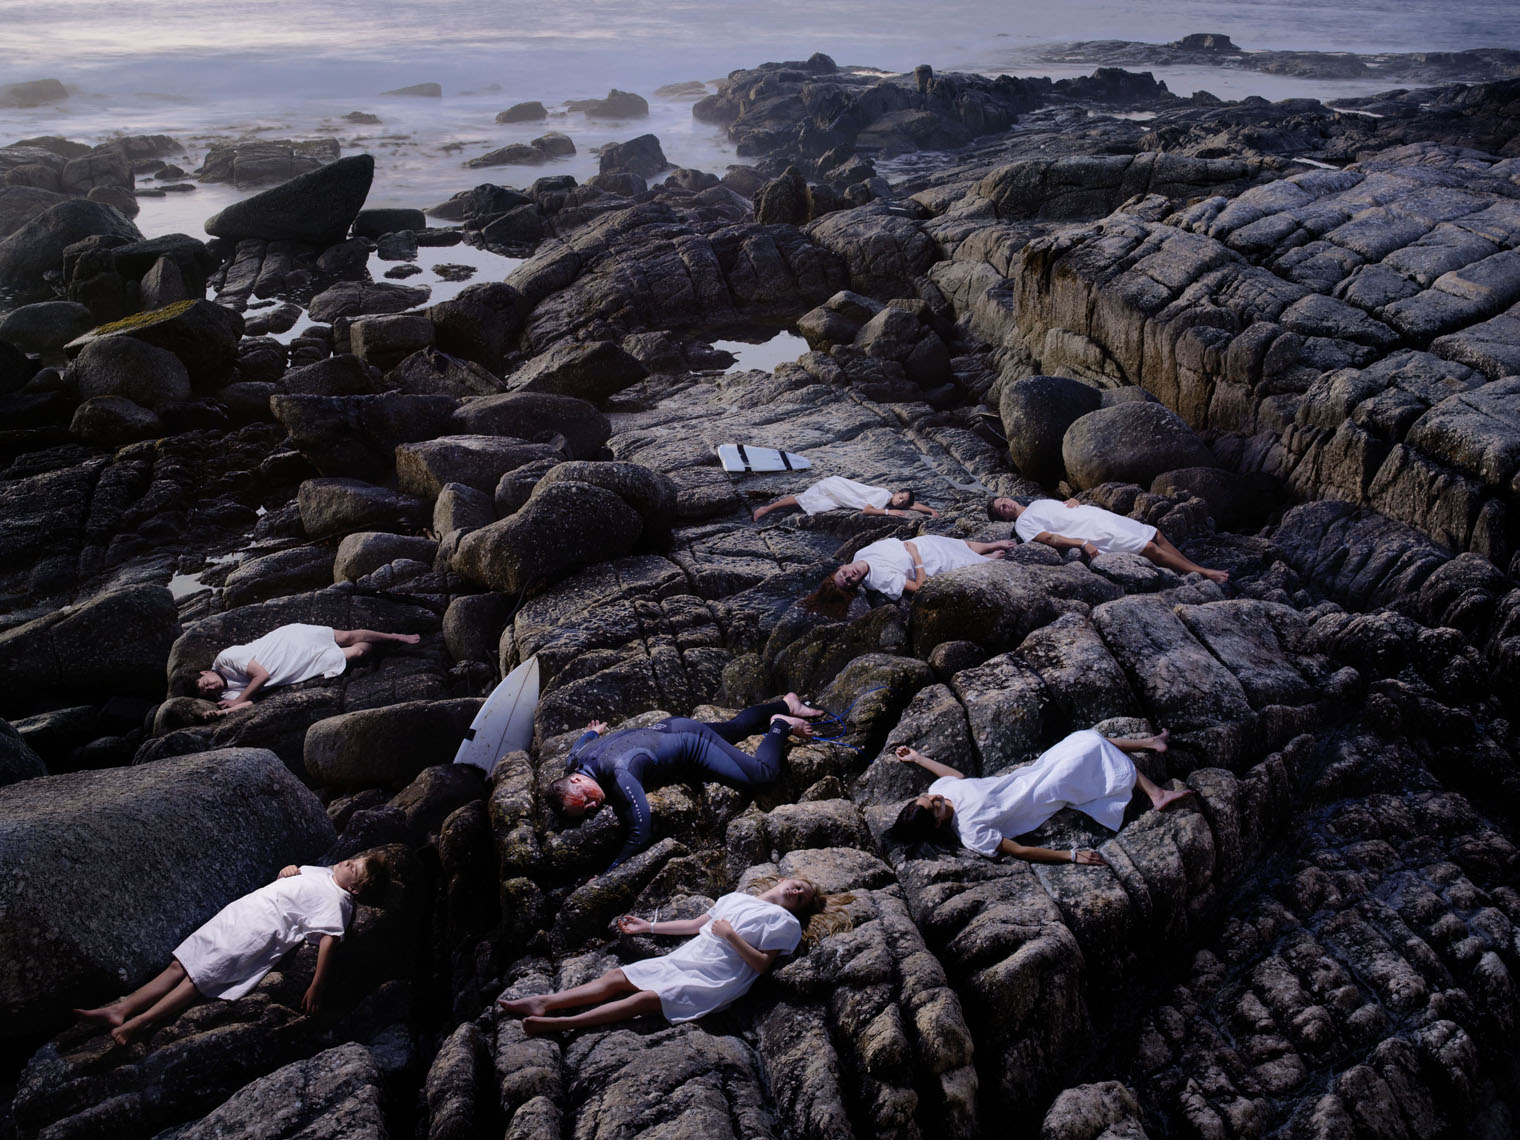 7 bodies lying on rocks representing the failure of one person to donate their organs.